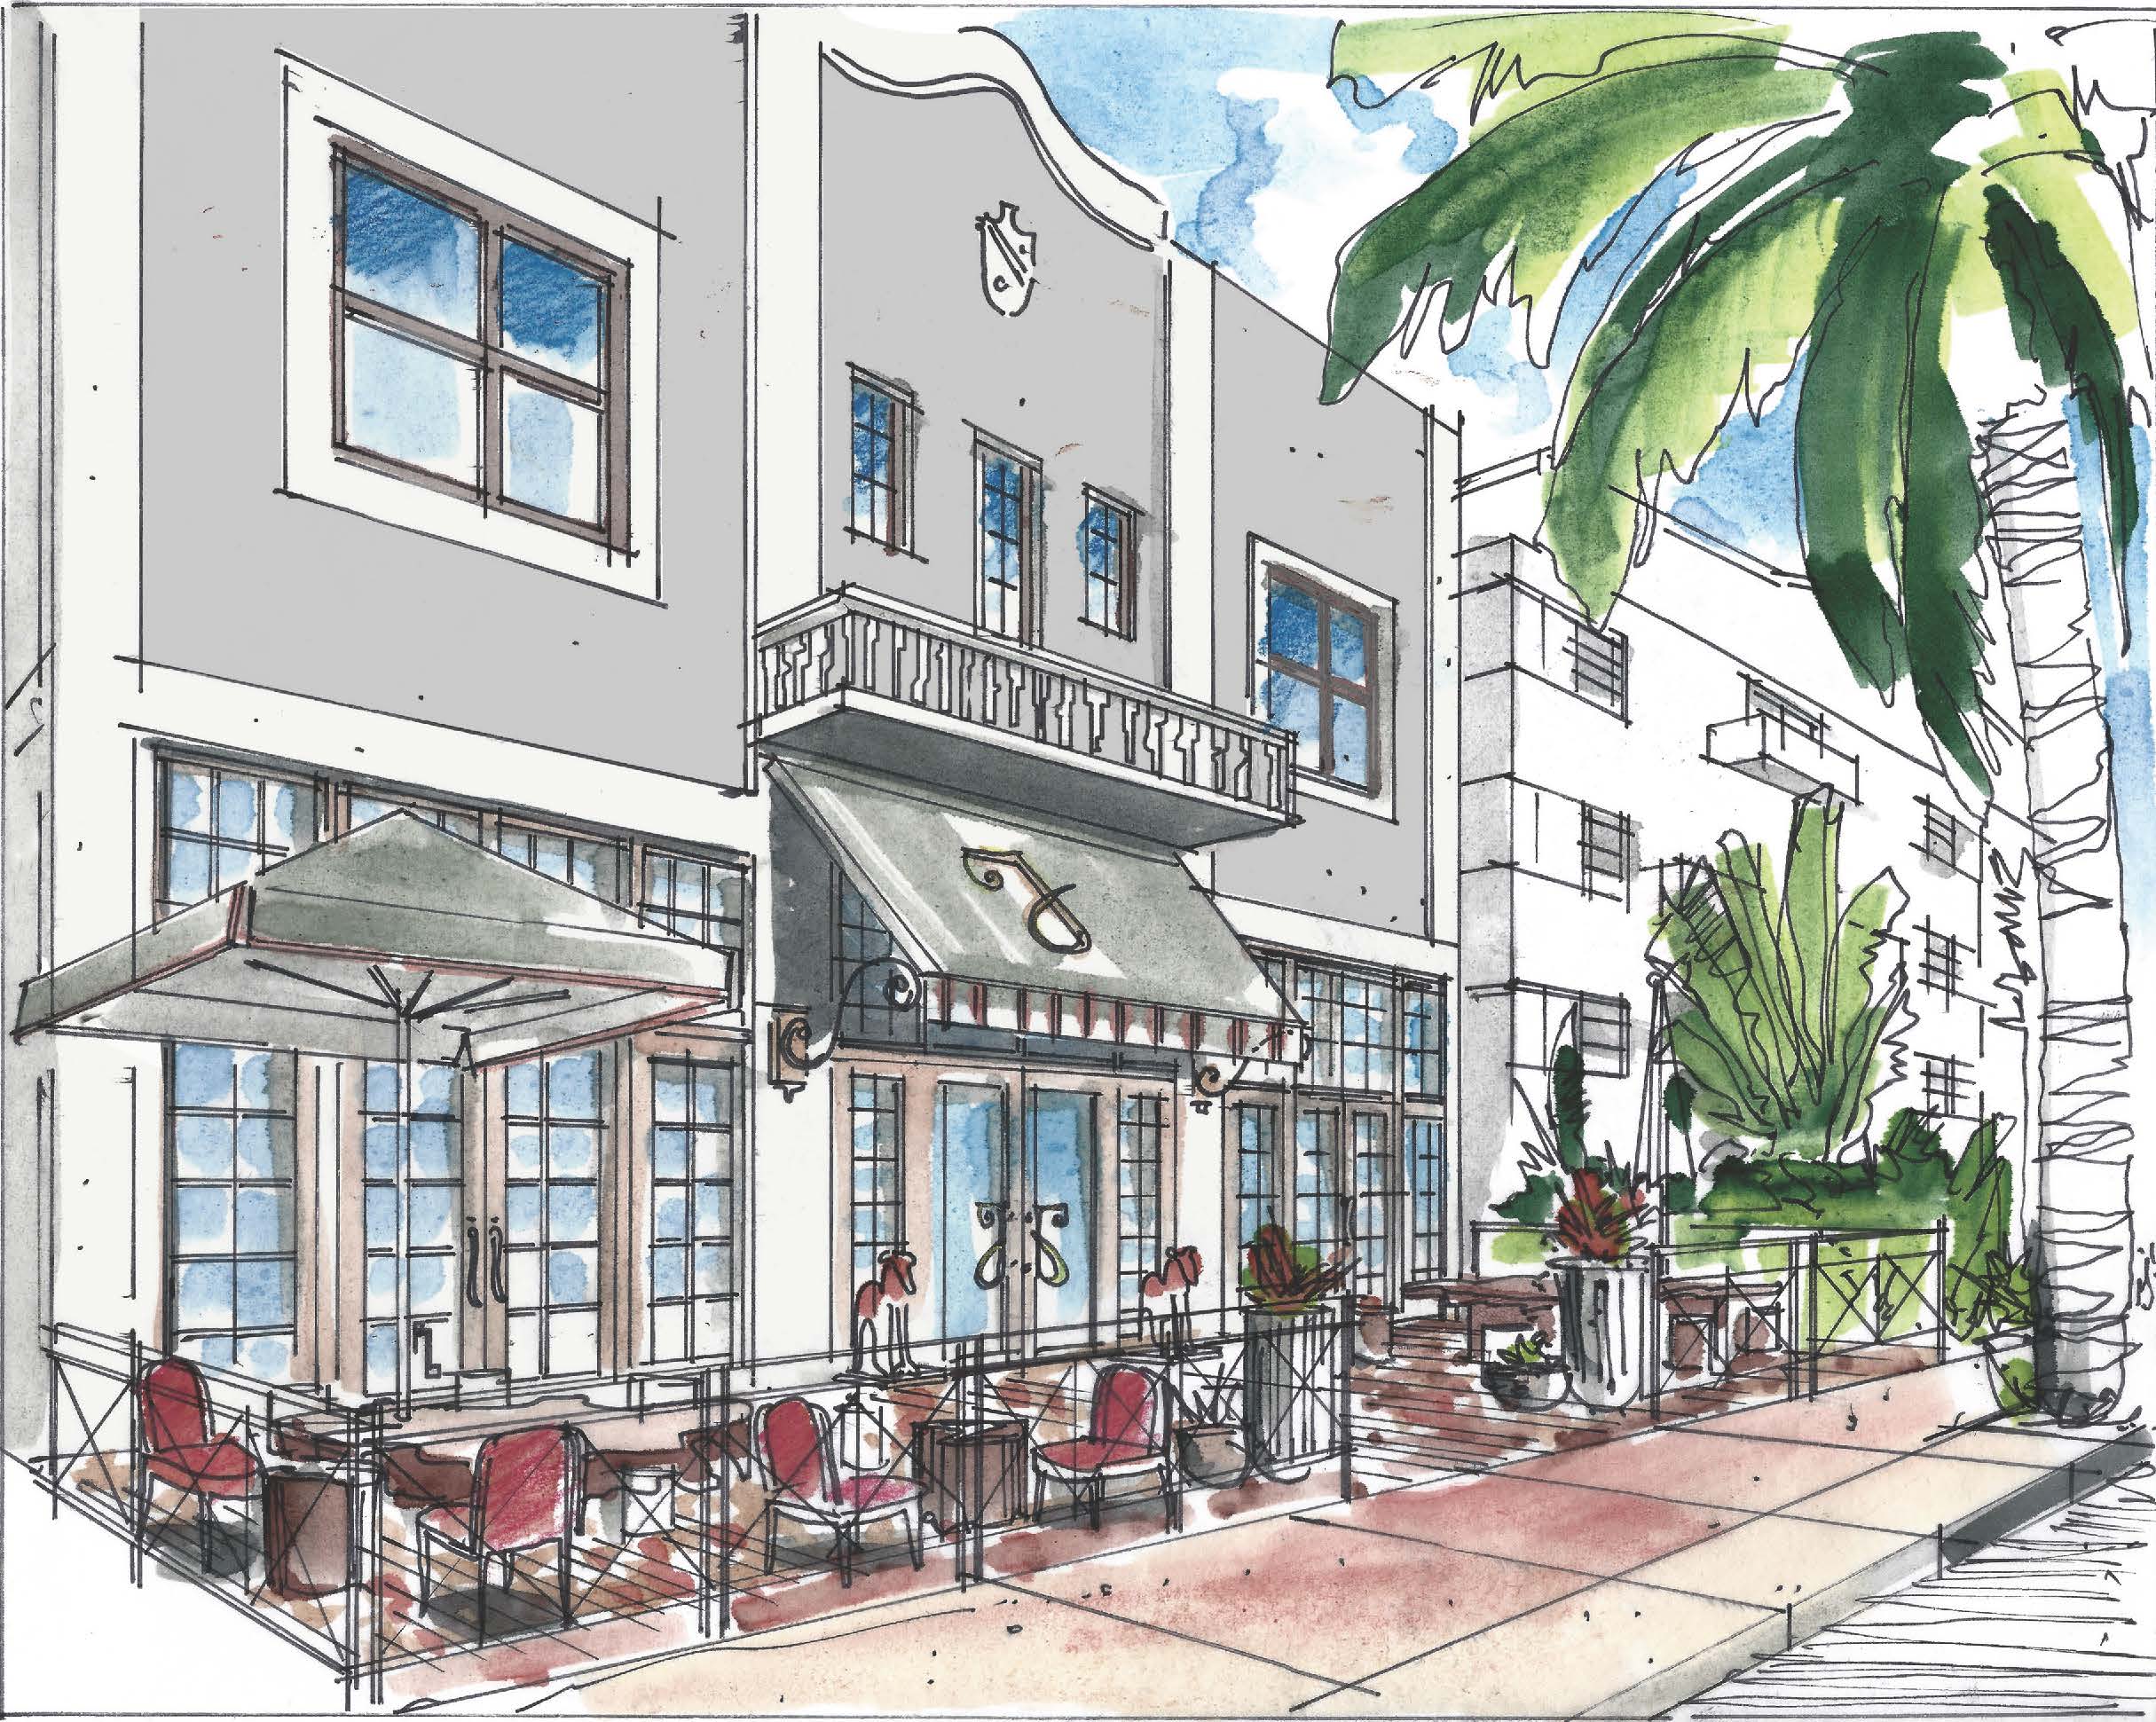 A traditional boutique hotel drawing in Miami Beach with a cafe out front